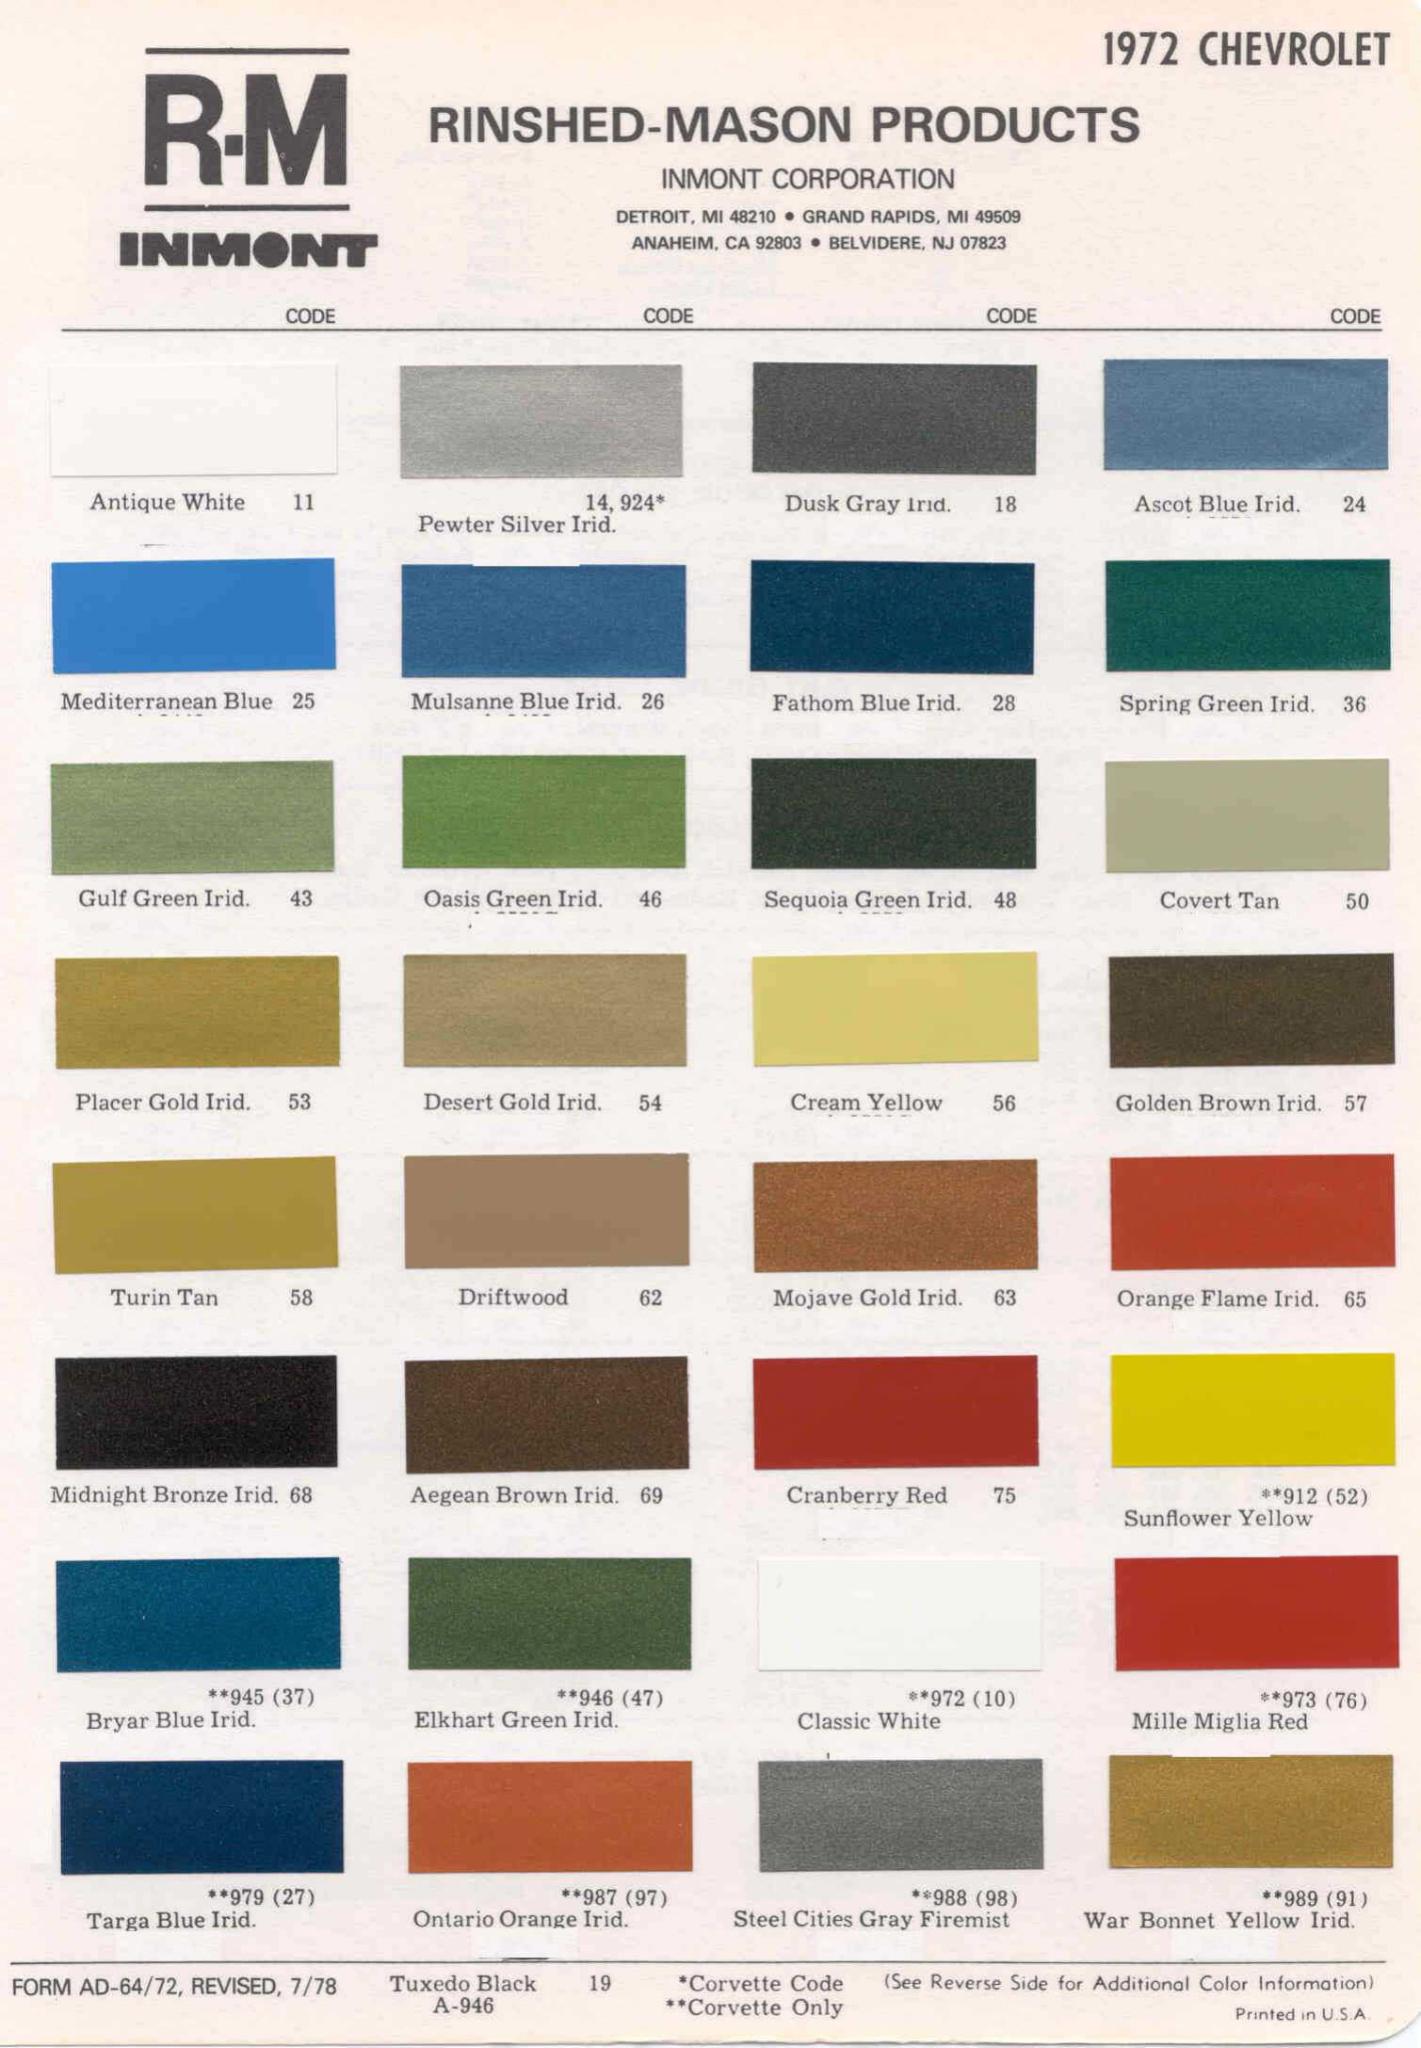 Exterior Colors and Codes used on Chevrolet in 1972 